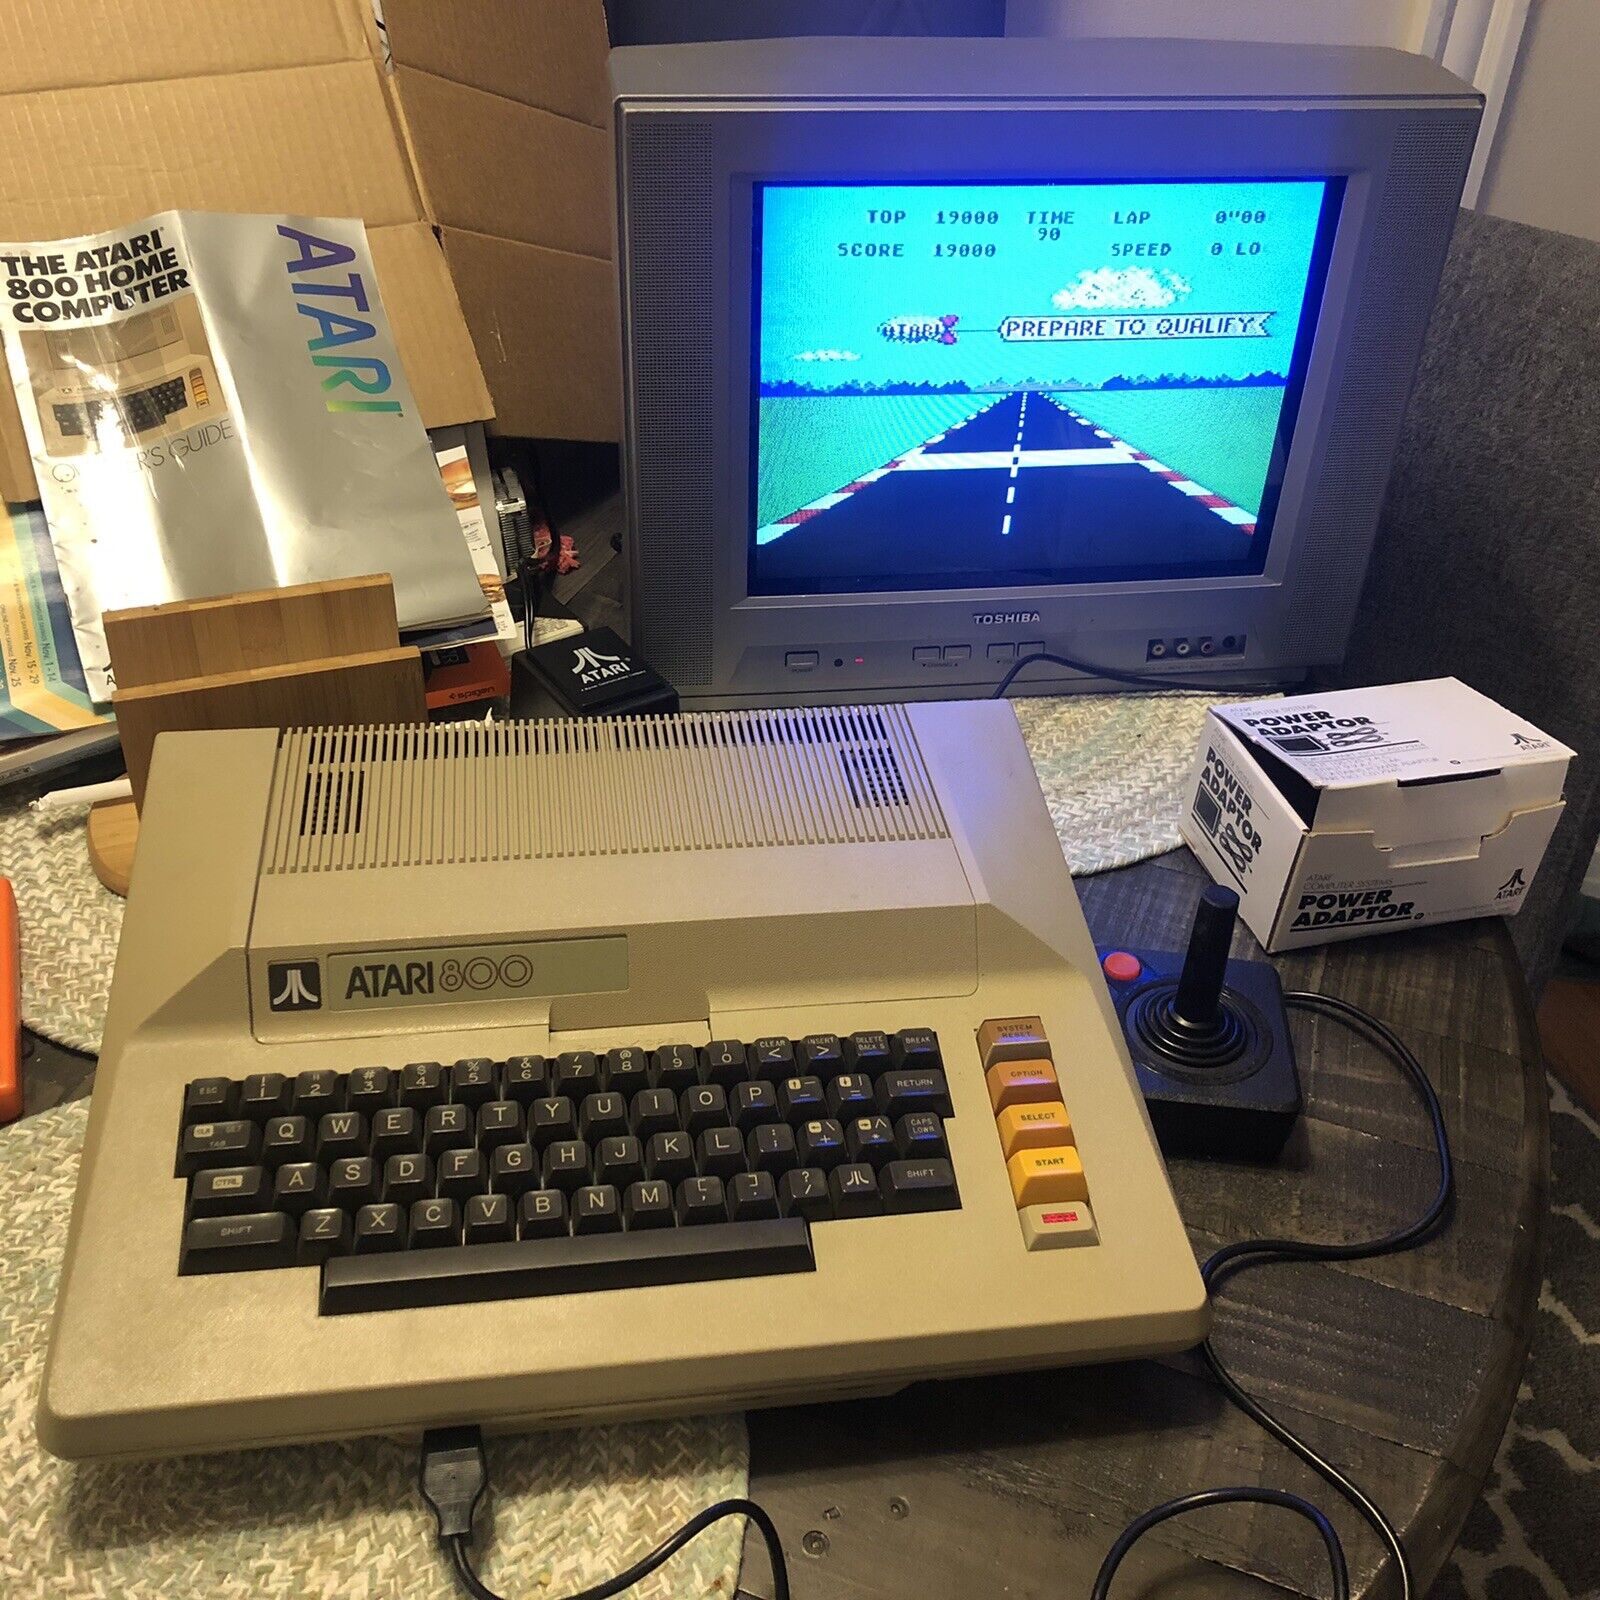 Atari 800 Home Computer Console Gaming System w/AC Adapter Pole Position 48K RAM